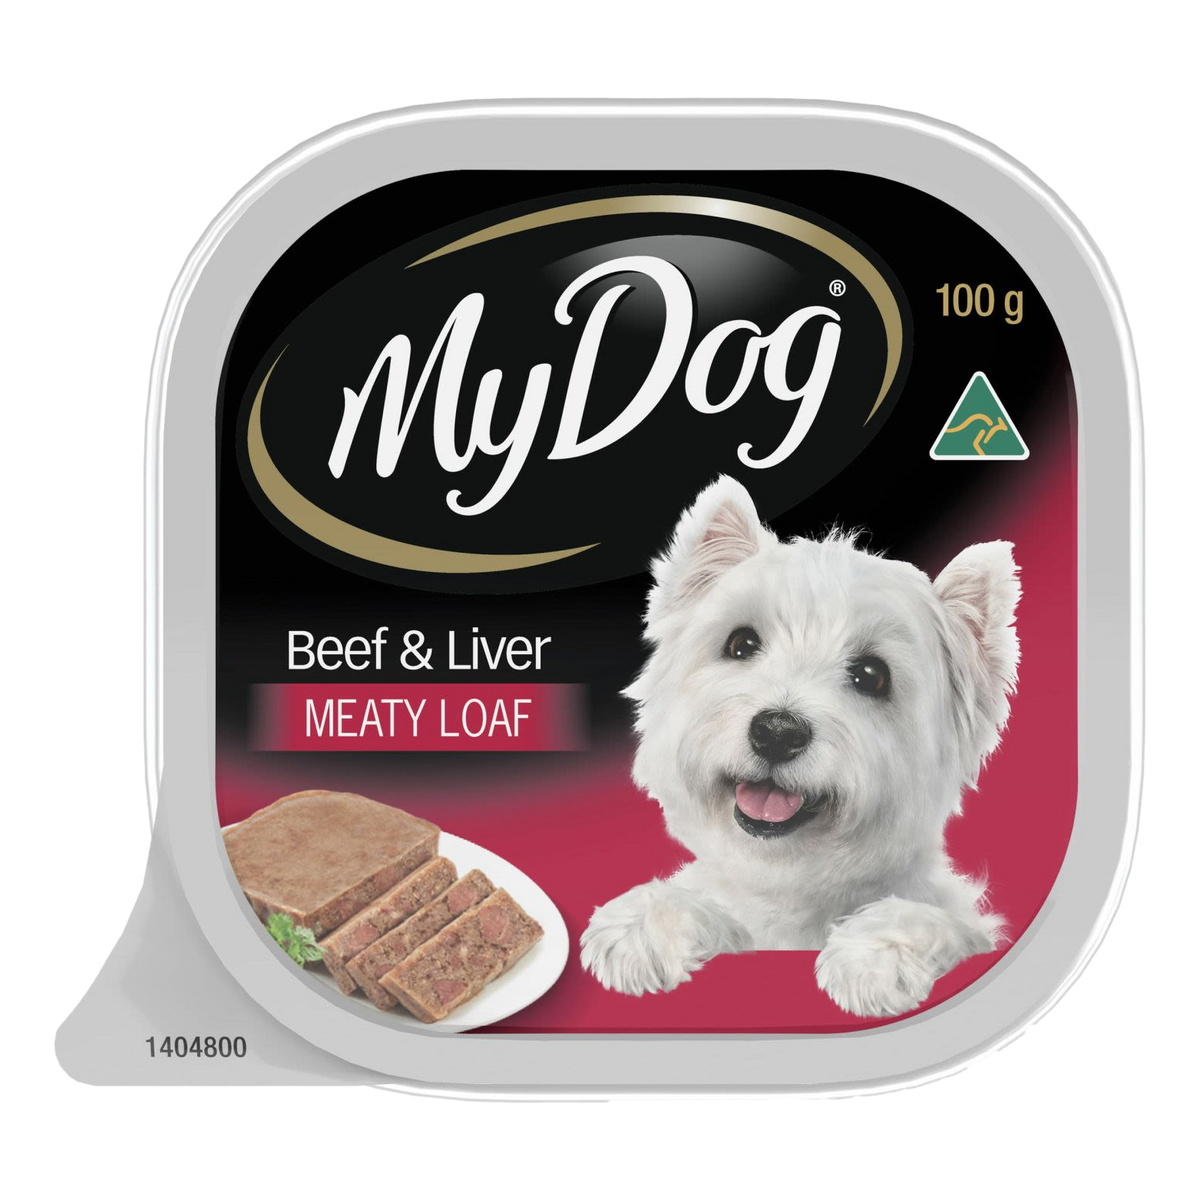 My Dog Meaty Loaf with Beef & Liver 100g